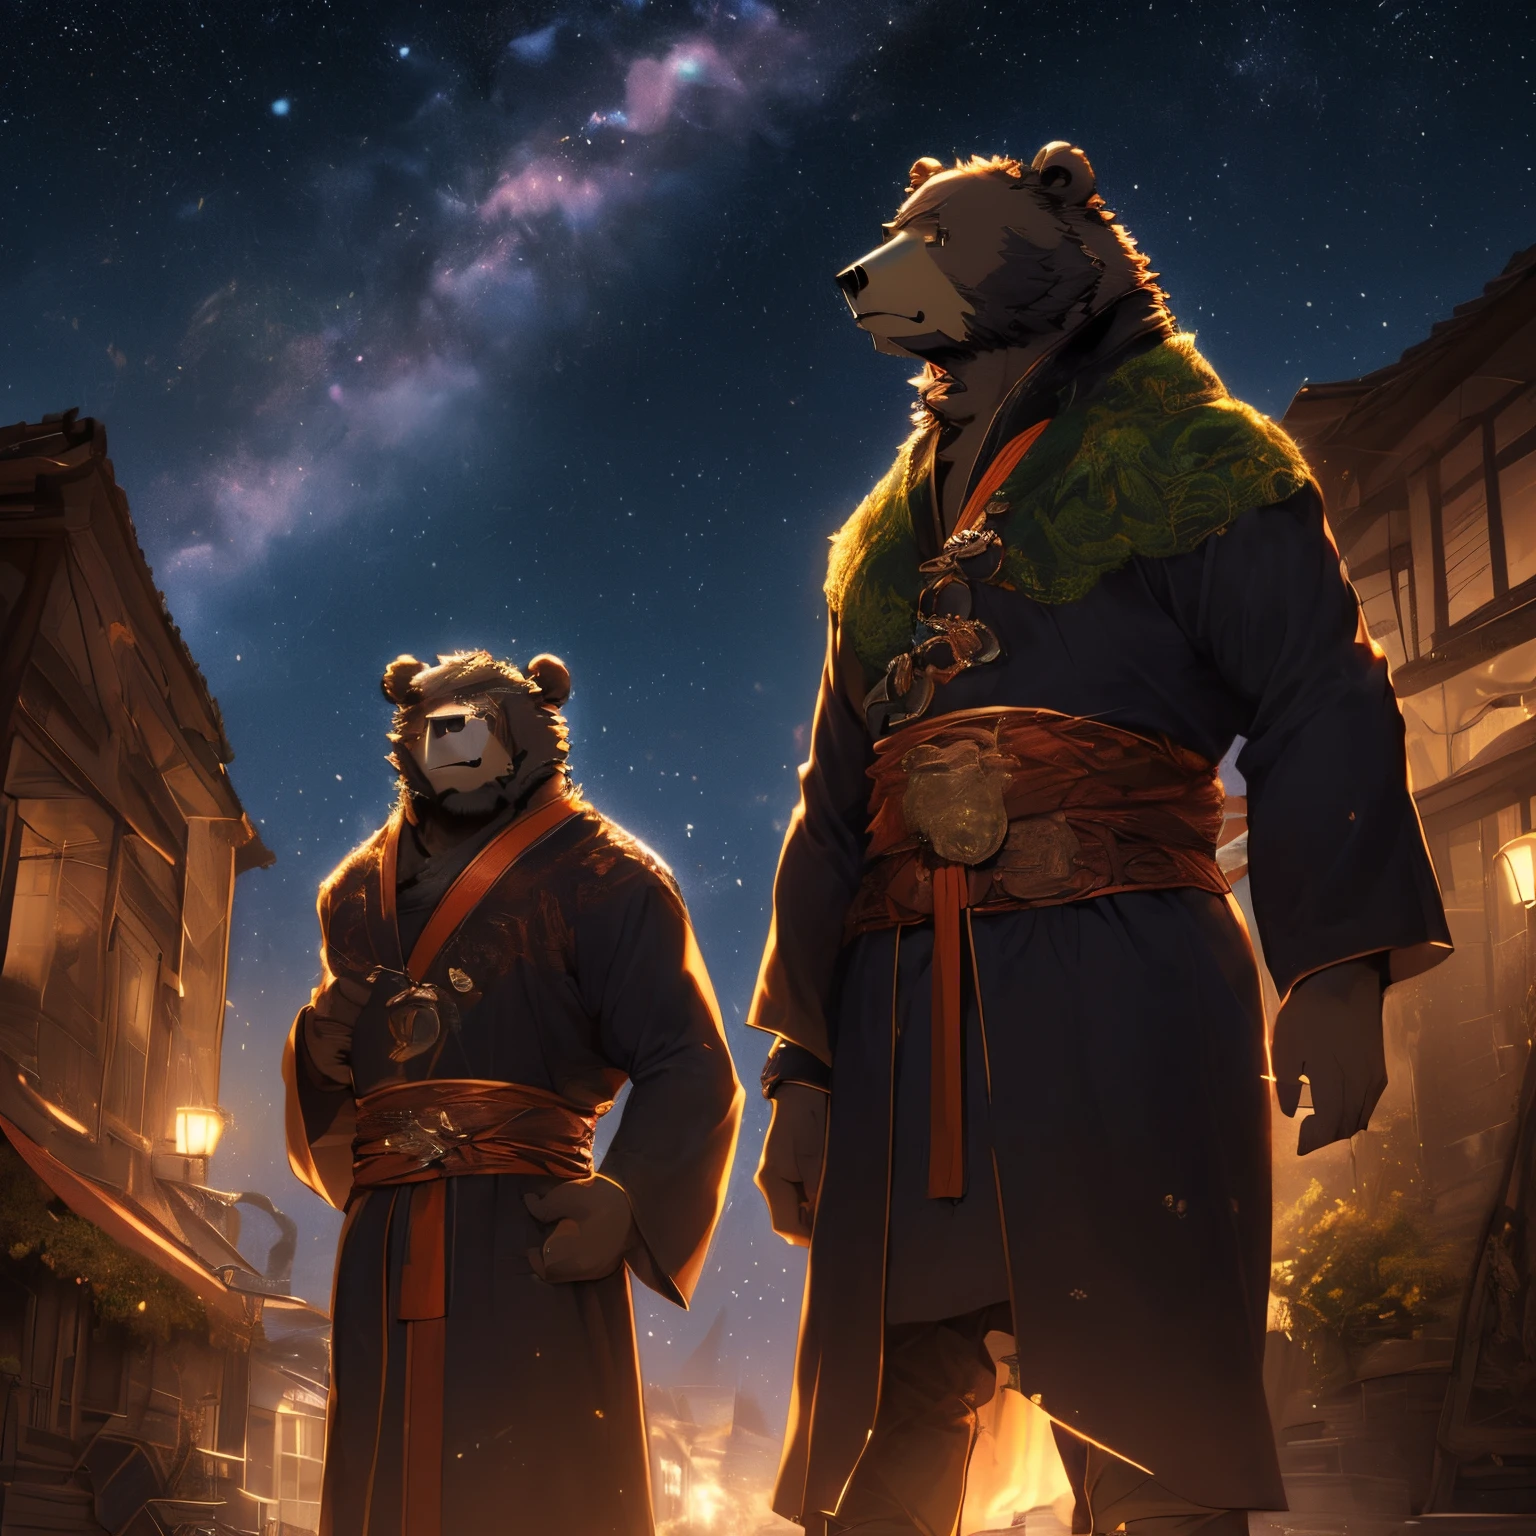 there are two bears standing in the middle of a street, anthropomorphic samurai bear, moon bear samurai, rob rey and kentarõ miura, ross tran and michael whelan, official concept art, rob rey and kentarõ miura style, black bear samurai, rob rey and kentaro miura style, edgar maxence and ross tran